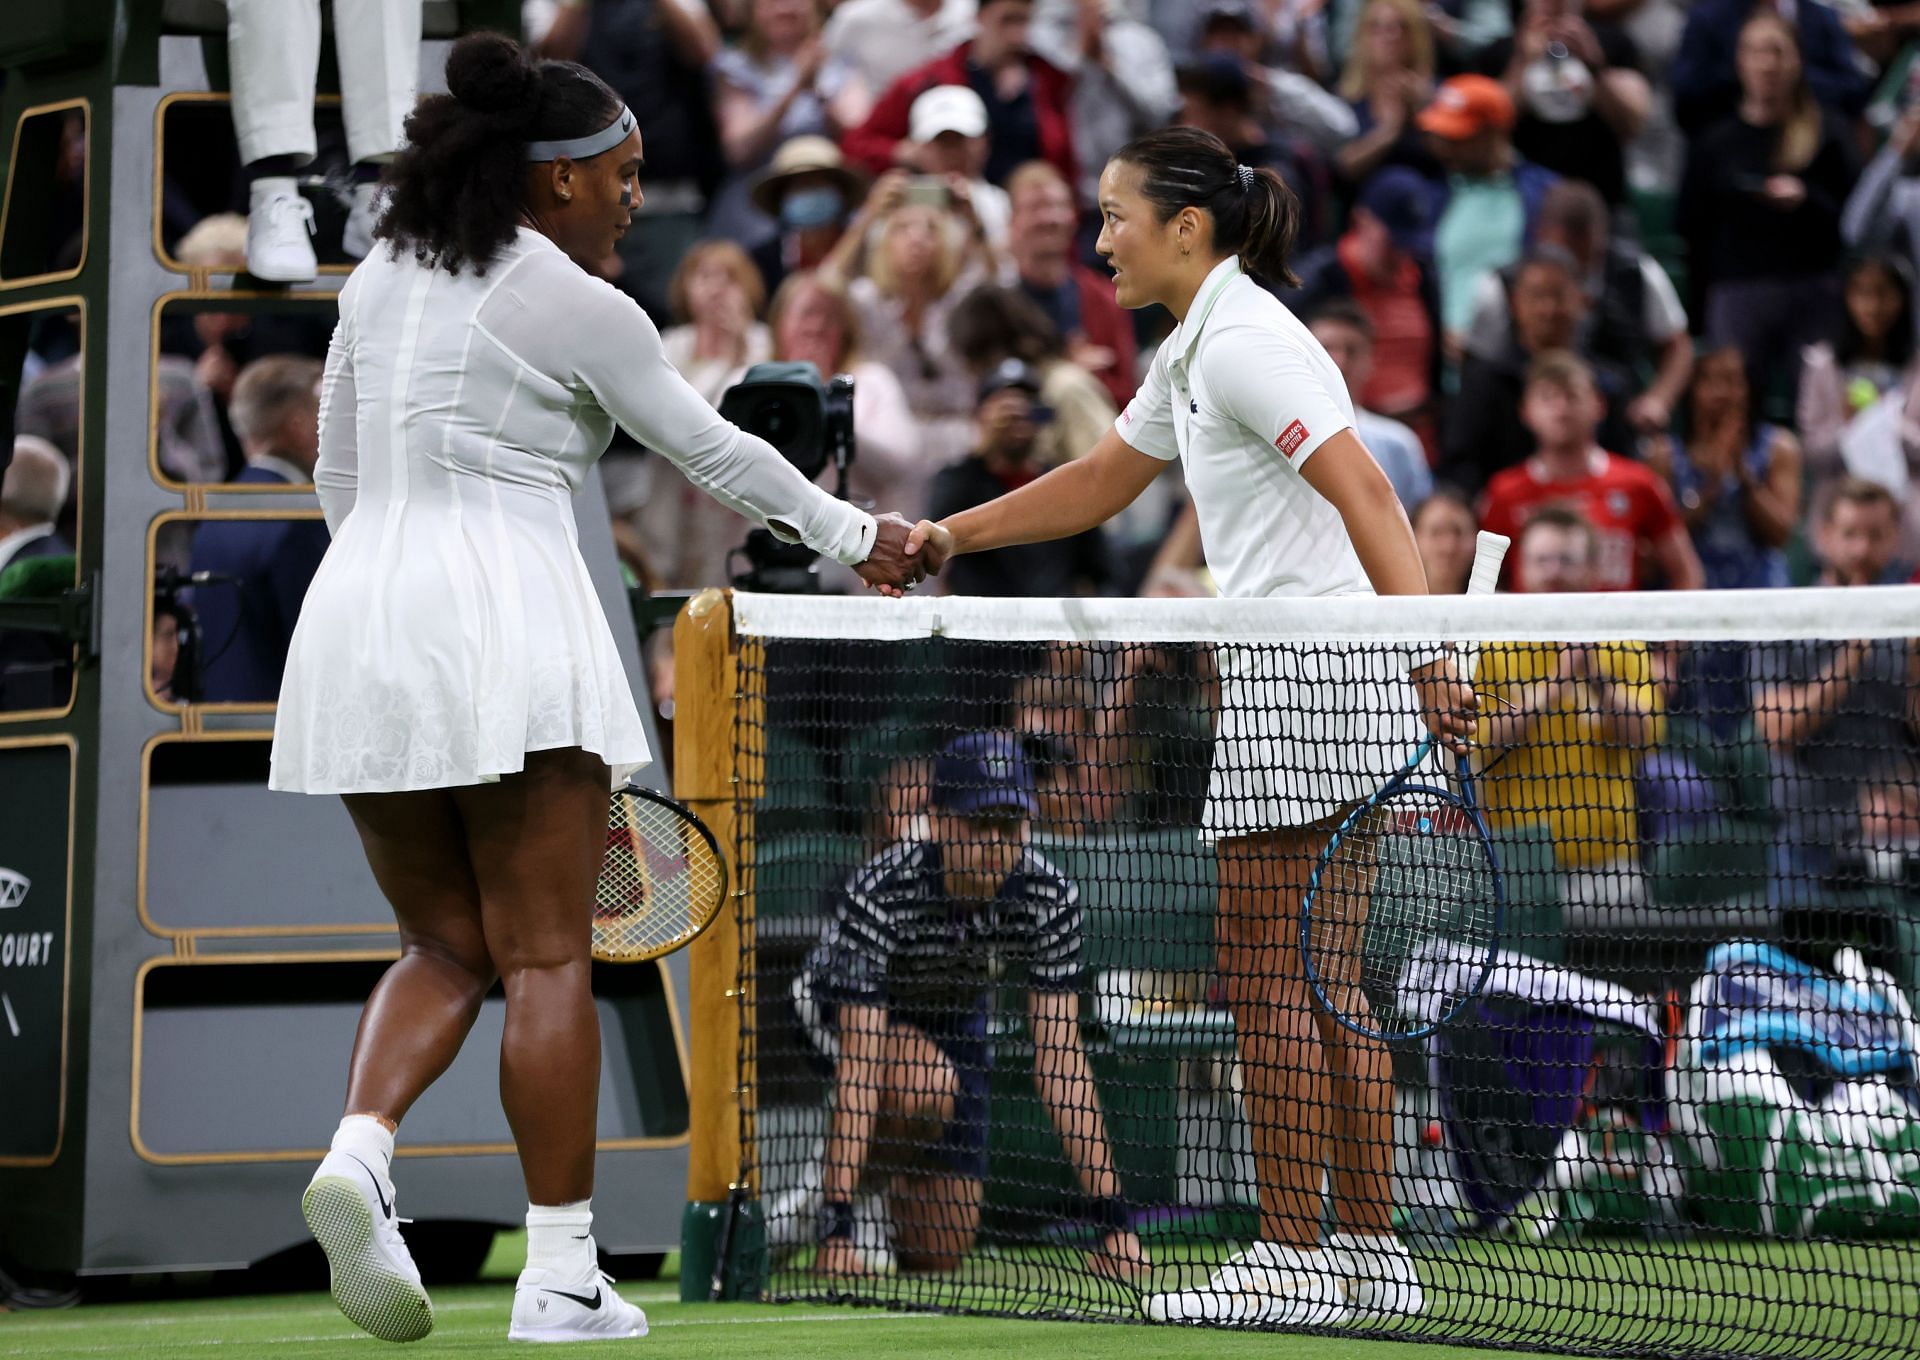 Serena Williams lost in the opening round of Wimbledon 2022.